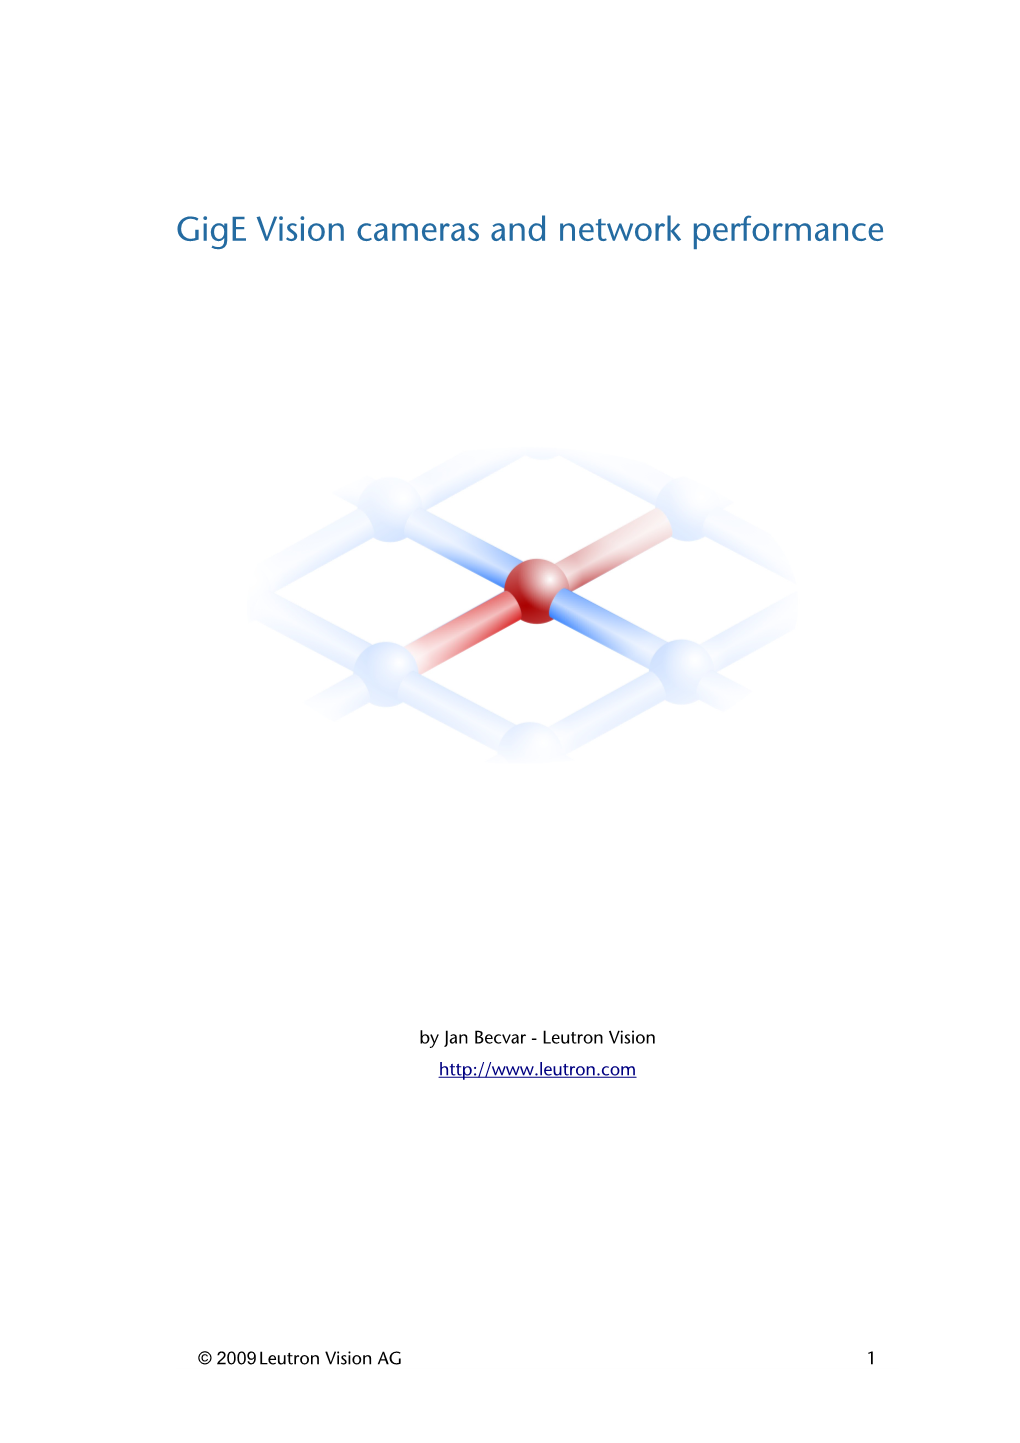 Gige Vision Cameras and Network Performance